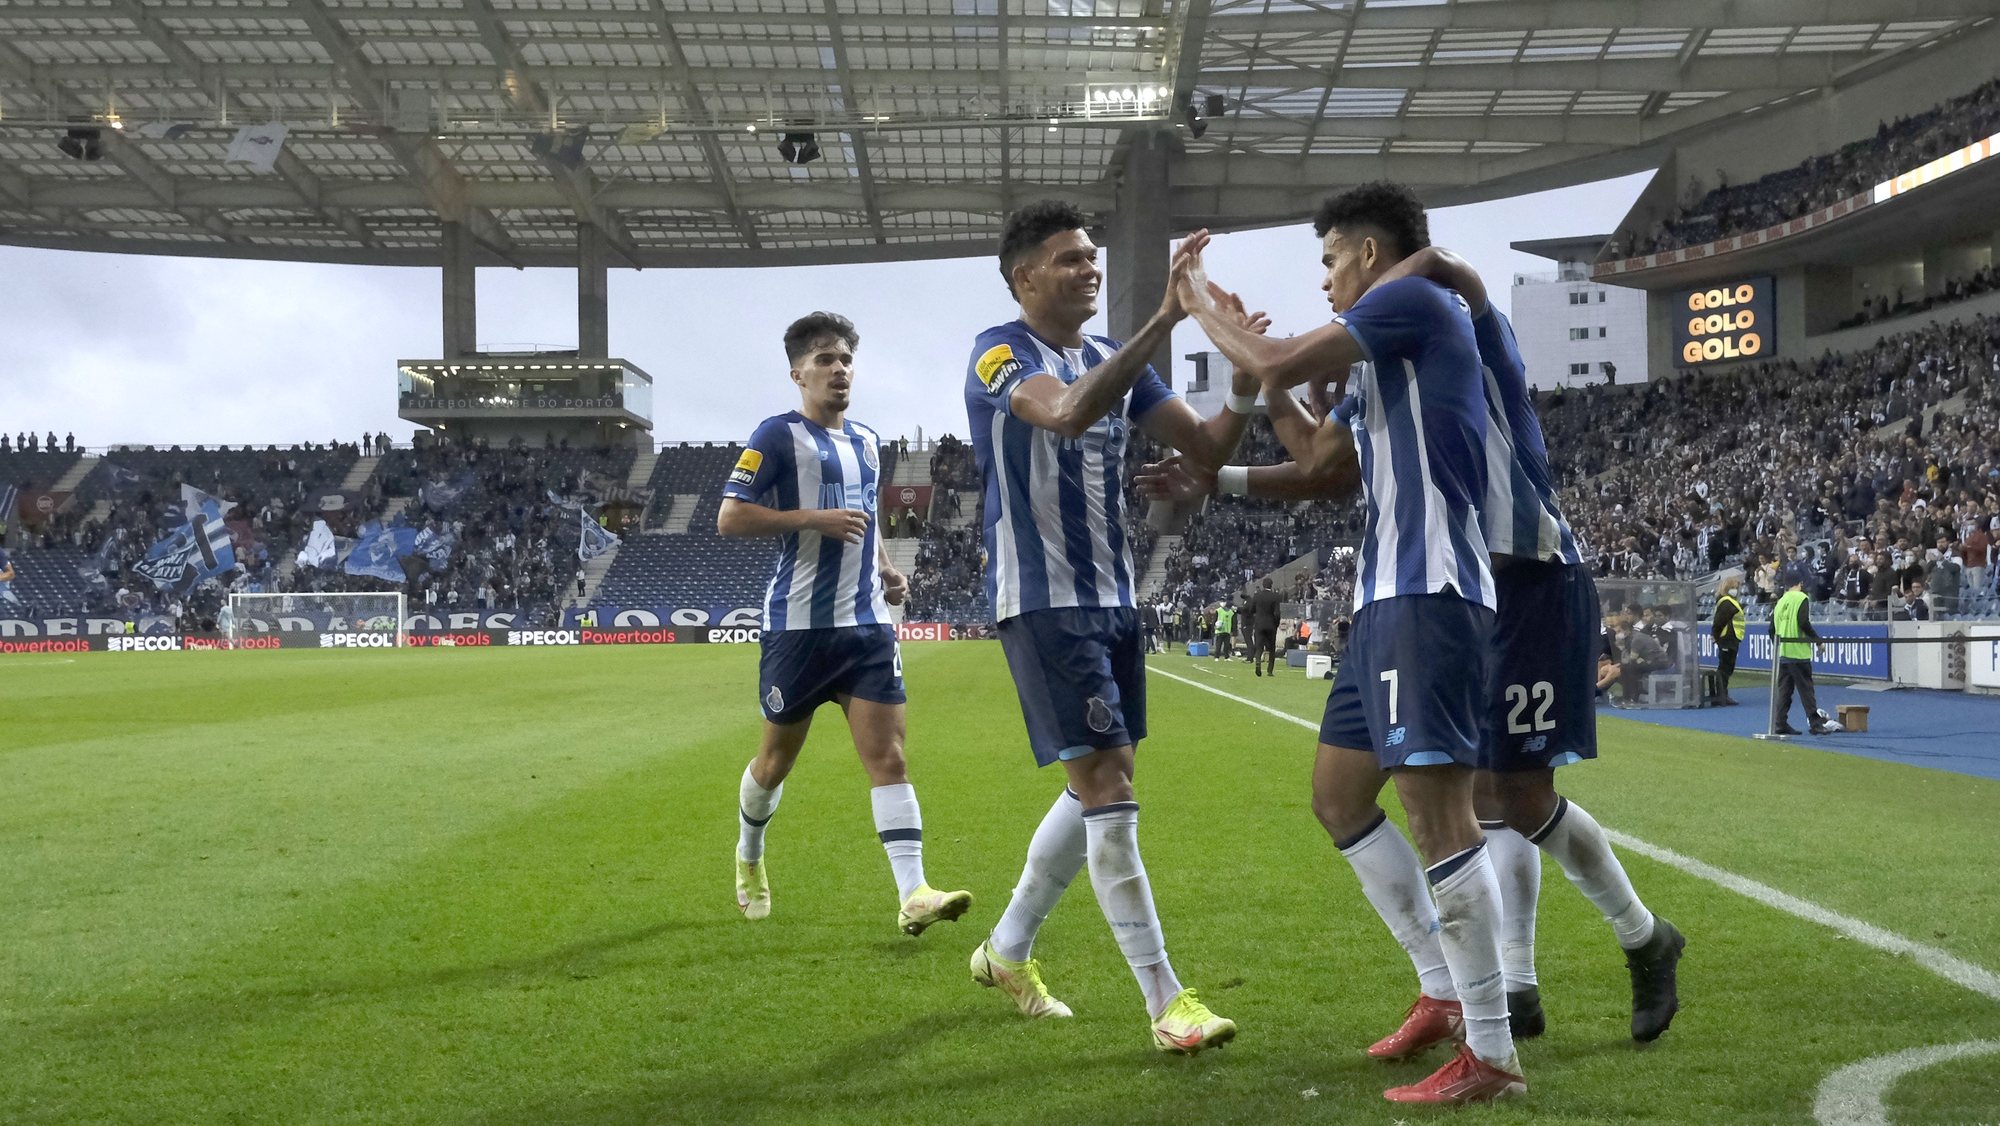 FC Porto player Luis Diaz (2R) celebrates after scoring a goal against Pacos de Ferreira during their Portuguese First League soccer match held at Dragao Stadium in Porto, northwest of Portugal, 02 October 2021. FERNANDO VELUDO/LUSA